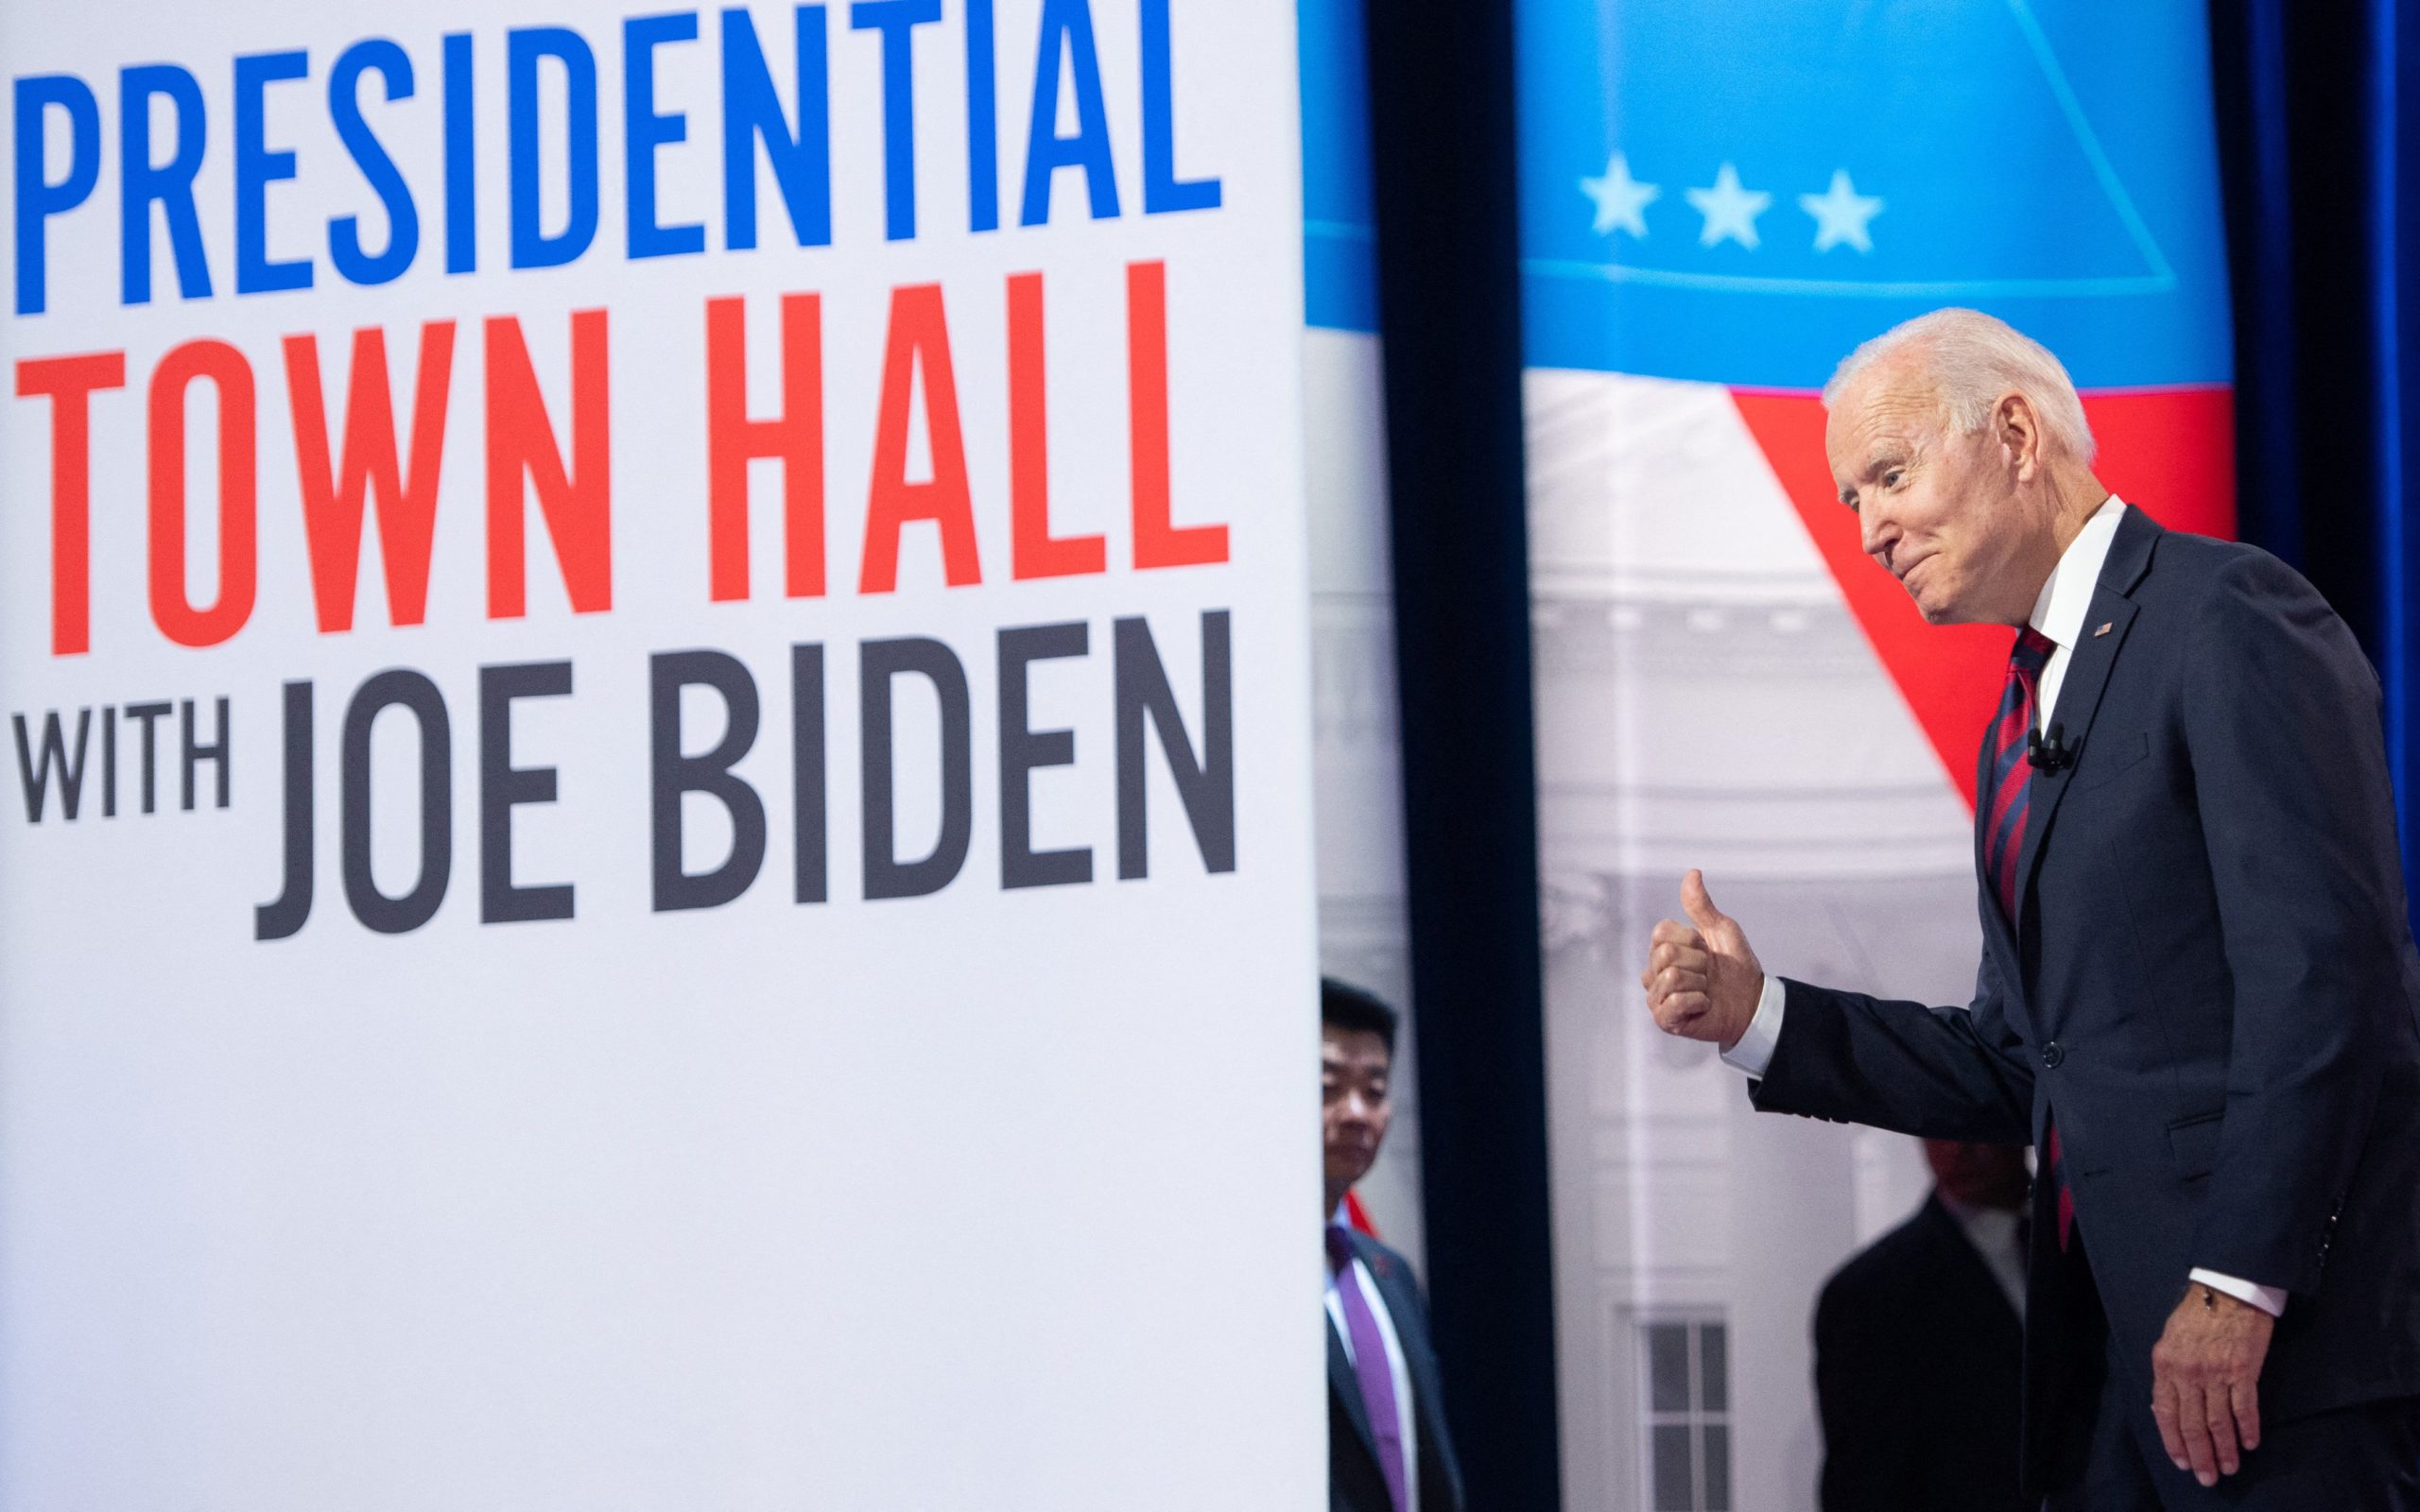 US President Joe Biden gives a thumbs up as he participates in a CNN Town Hall hosted by Don Lemon (R) at Mount St. Joseph University in Cincinnati, Ohio, July 21, 2021. (Photo by SAUL LOEB / AFP) (Photo by SAUL LOEB/AFP via Getty Images)